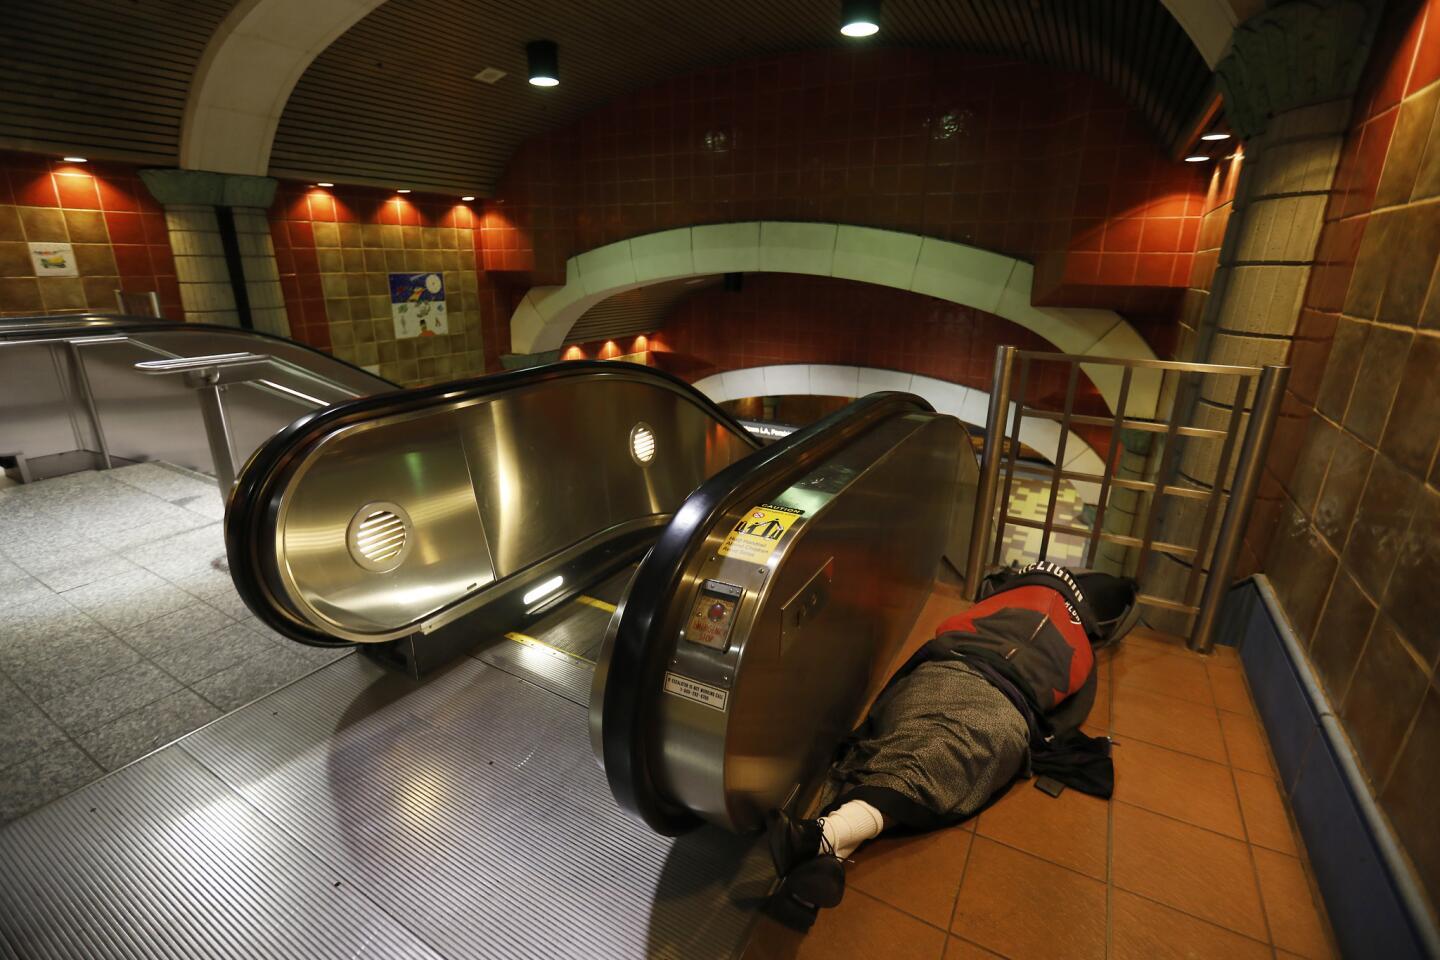 A person sleeps beside an escalator at the Hollywood/Vine Metro station. The 2018 Greater Los Angeles Homeless Count is tallying people around the city, including those sleeping near Metro stations and on trains.